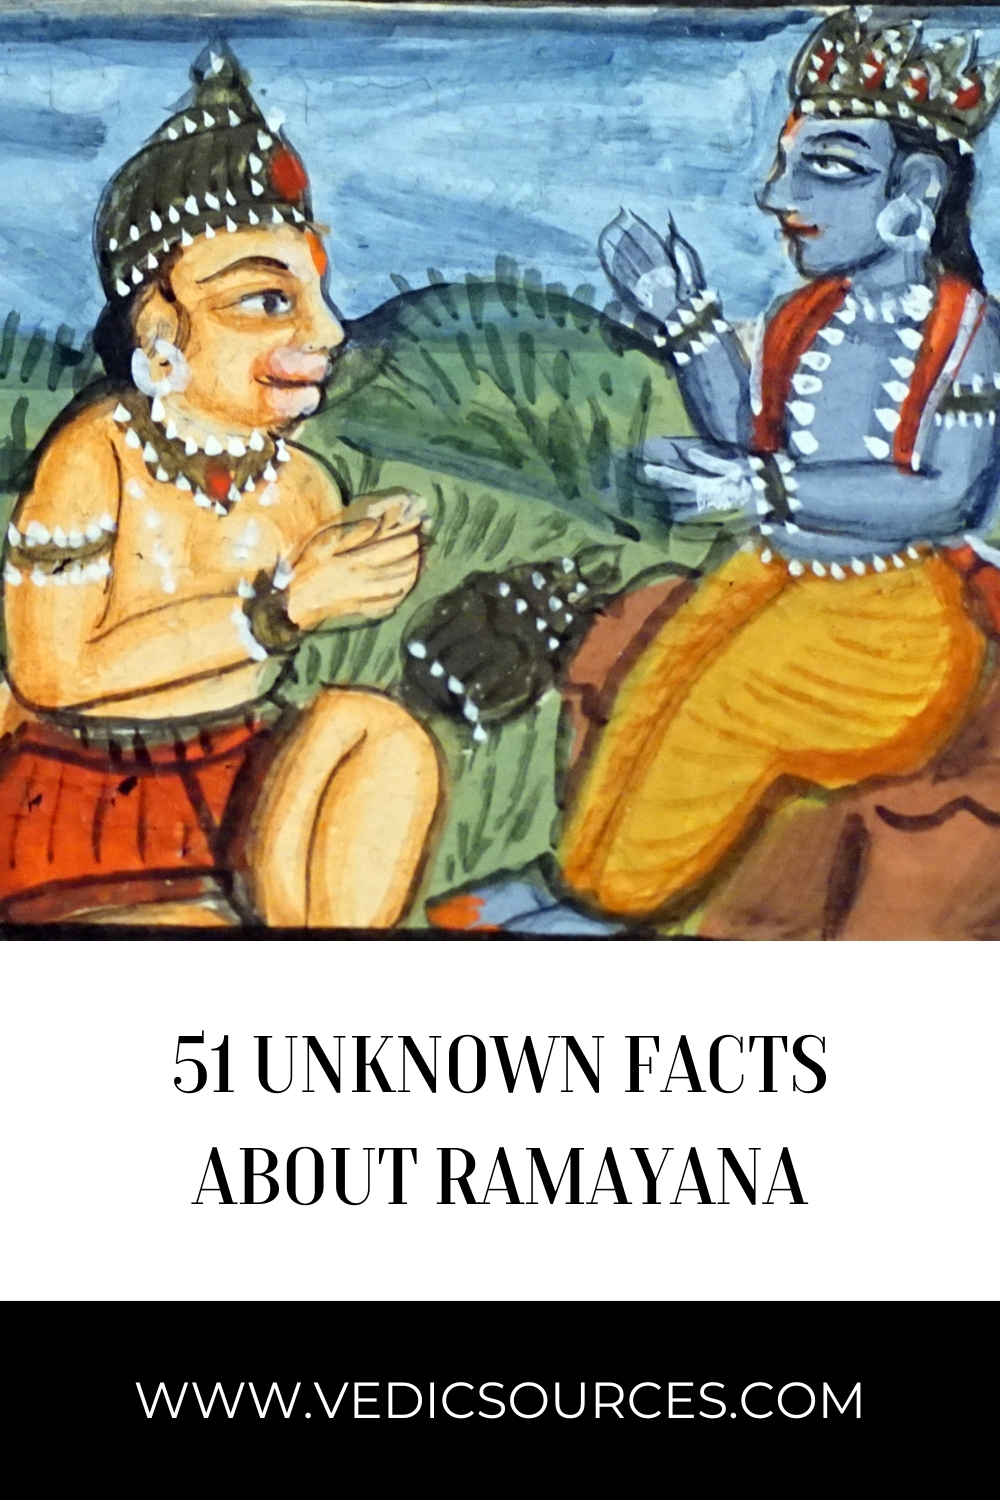 51 Unknown Facts About Ramayana